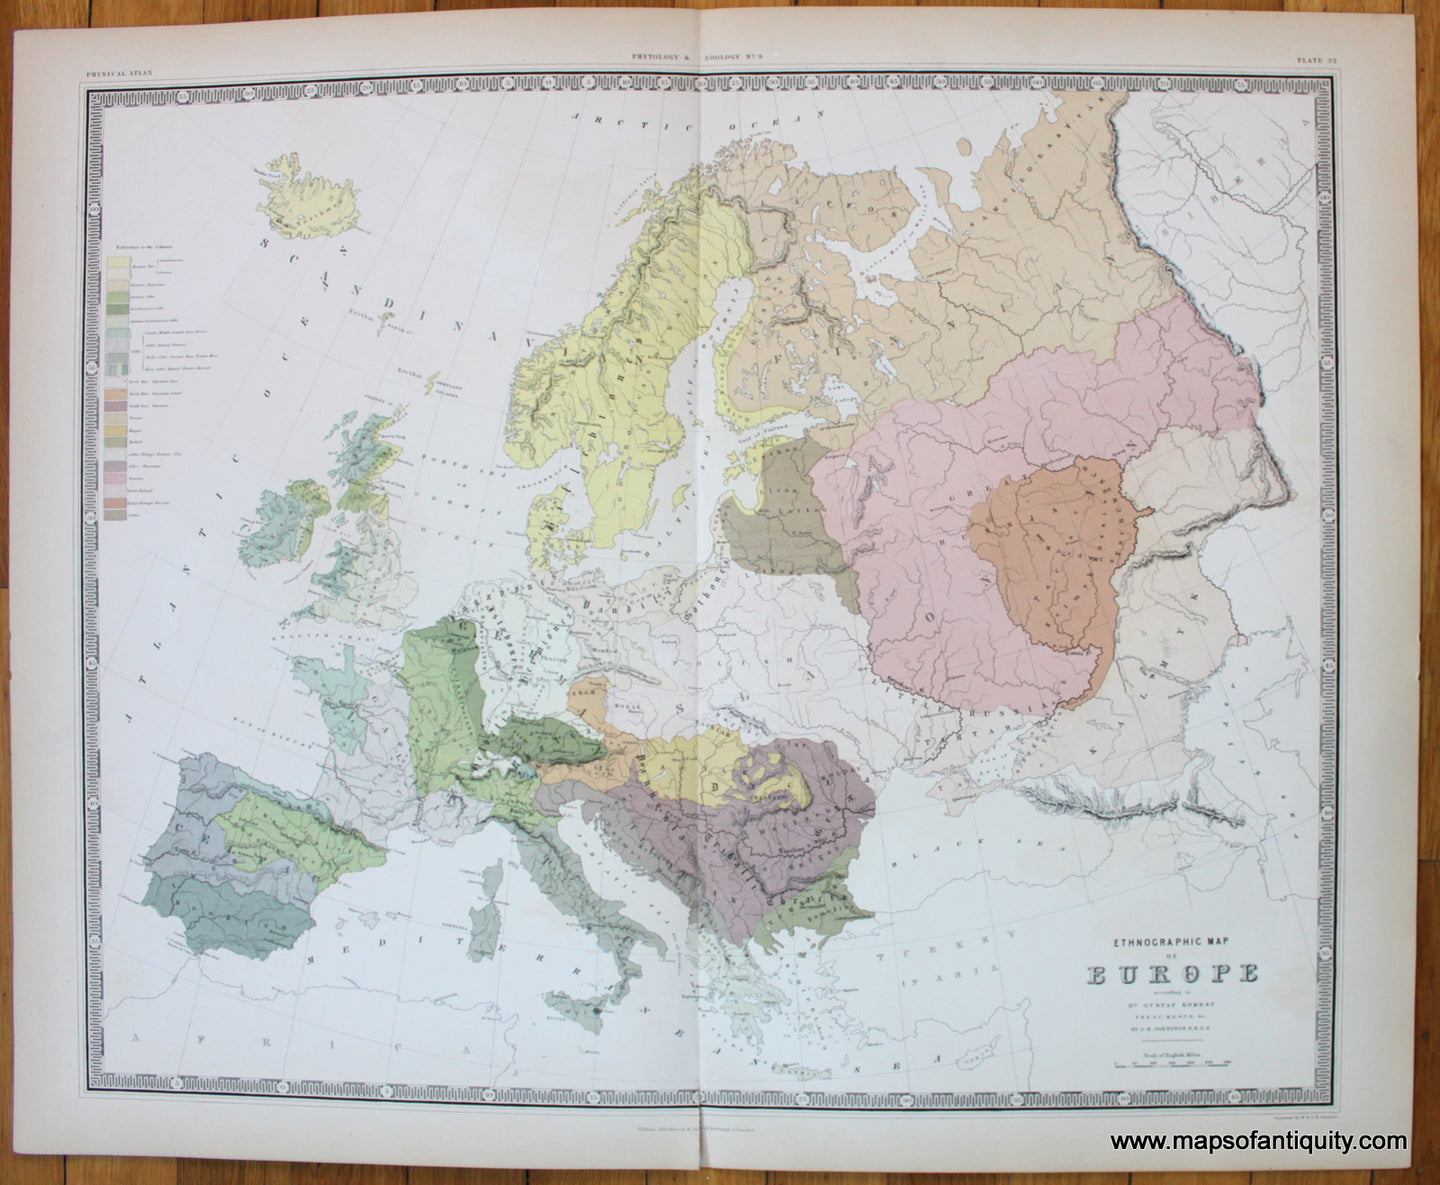 Ethnographic-Map-of-Europe-Johnston-1856-Antique-Map-1850s-1800s